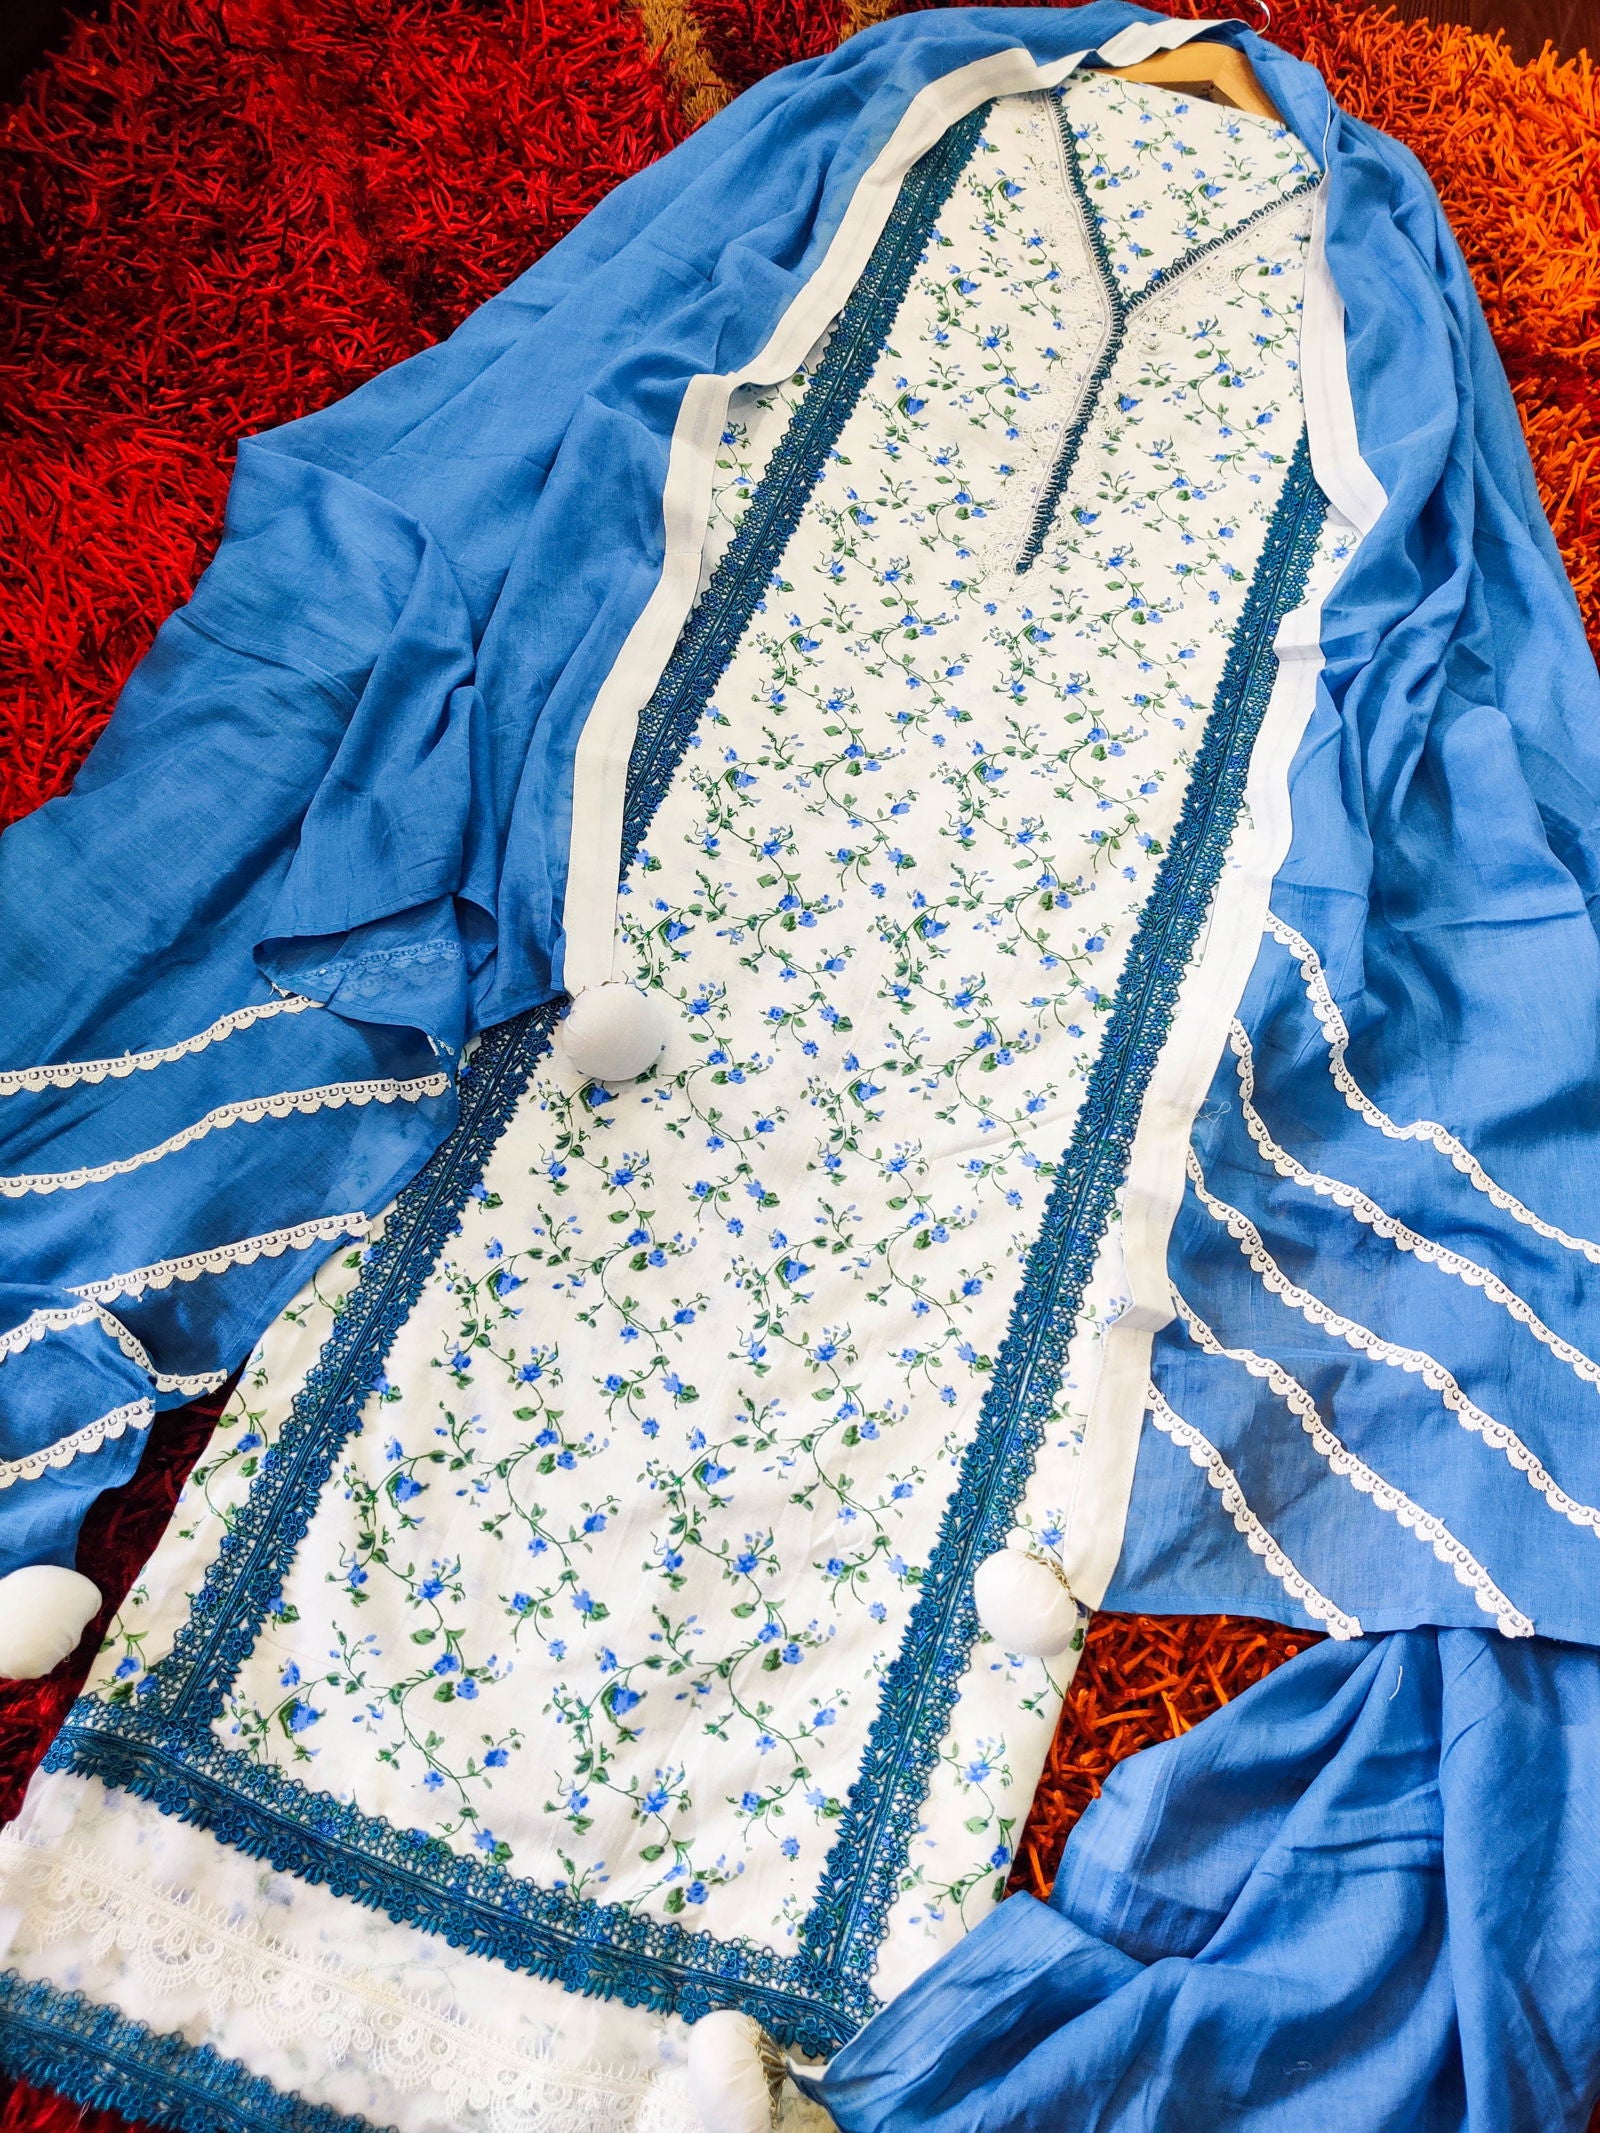 White Printed Cotton Unstitched Dress Material Kurta Set with Blue and White Lace Accents - Mom & You Clothing